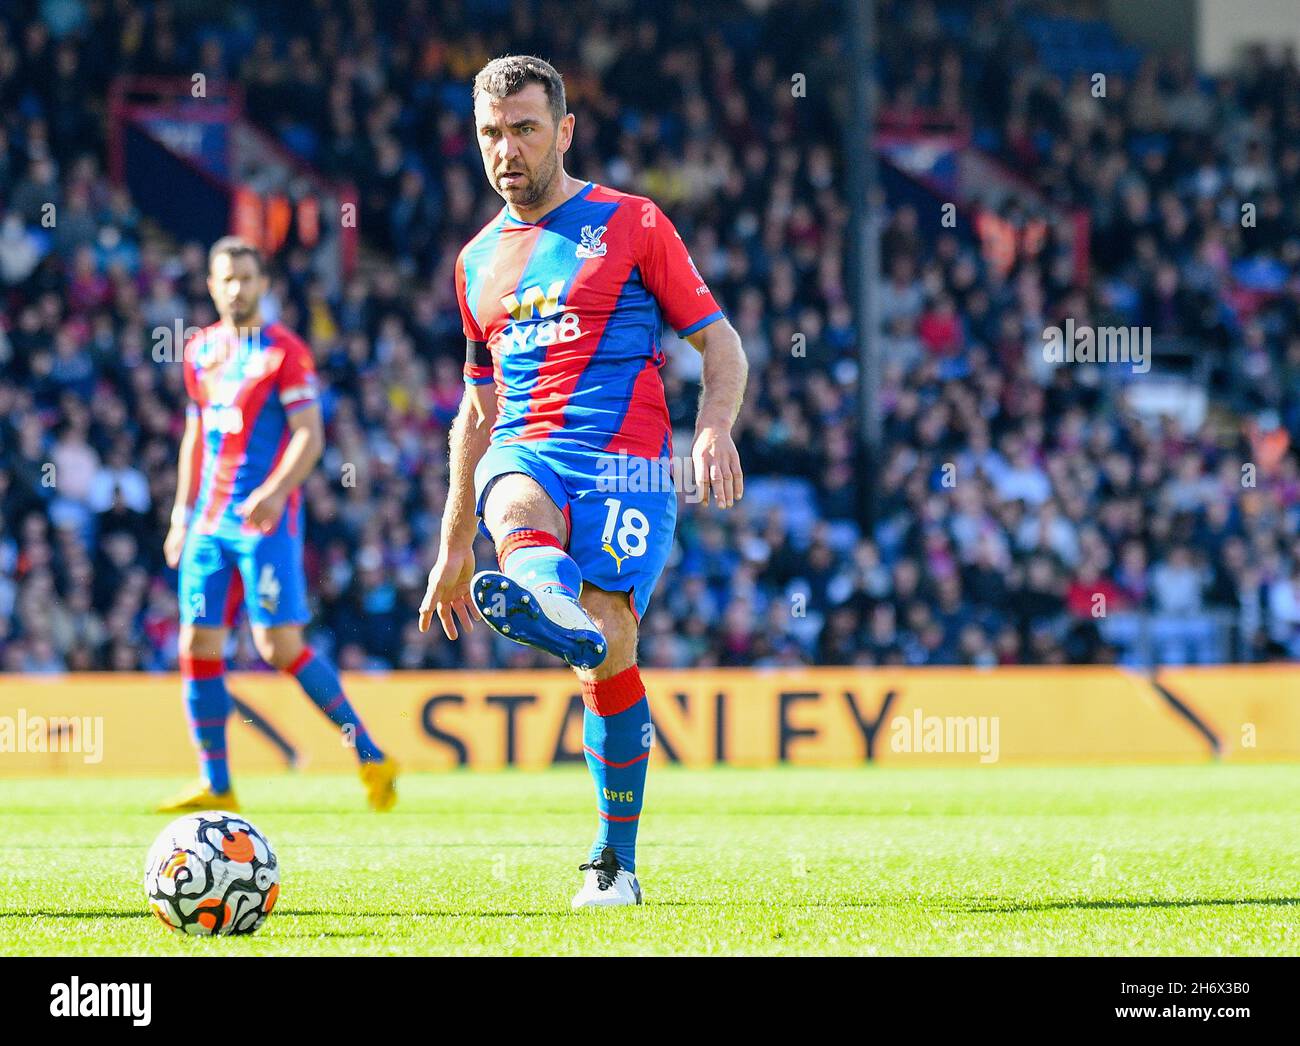 LONDON, ENGLAND - OCTOBER 3, 2021: James McFarlane McArthur of Palace pictured during the 2021-22 Premier League matchweek 7 game between Crystal Palace FC and Leicester CIty FC at Selhurst Park. Copyright: Cosmin Iftode/Picstaff Stock Photo